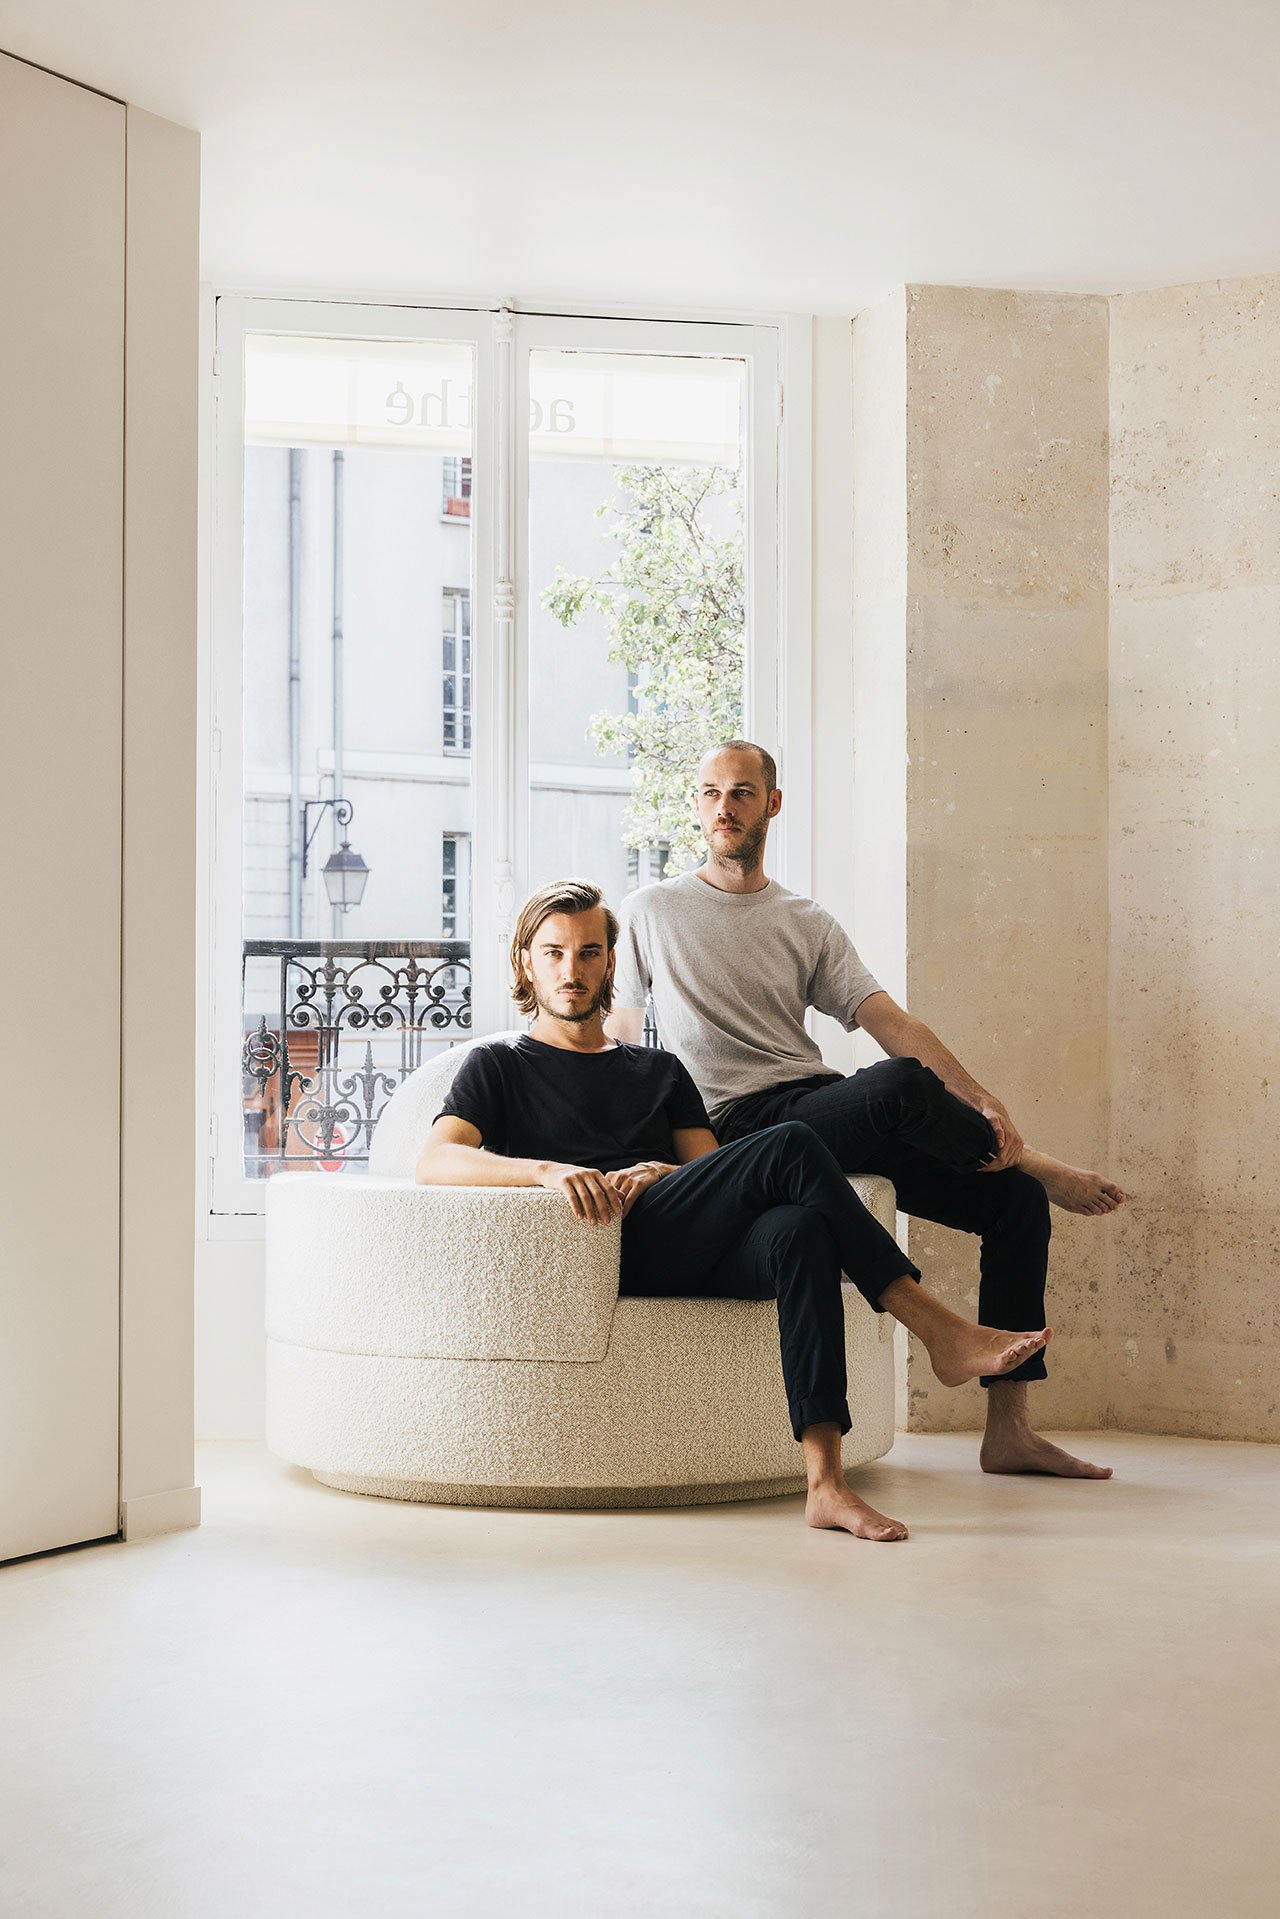 G R A M M E  founders Romain Freychet and Antoine Prax. Photography by Ludovic Balay.